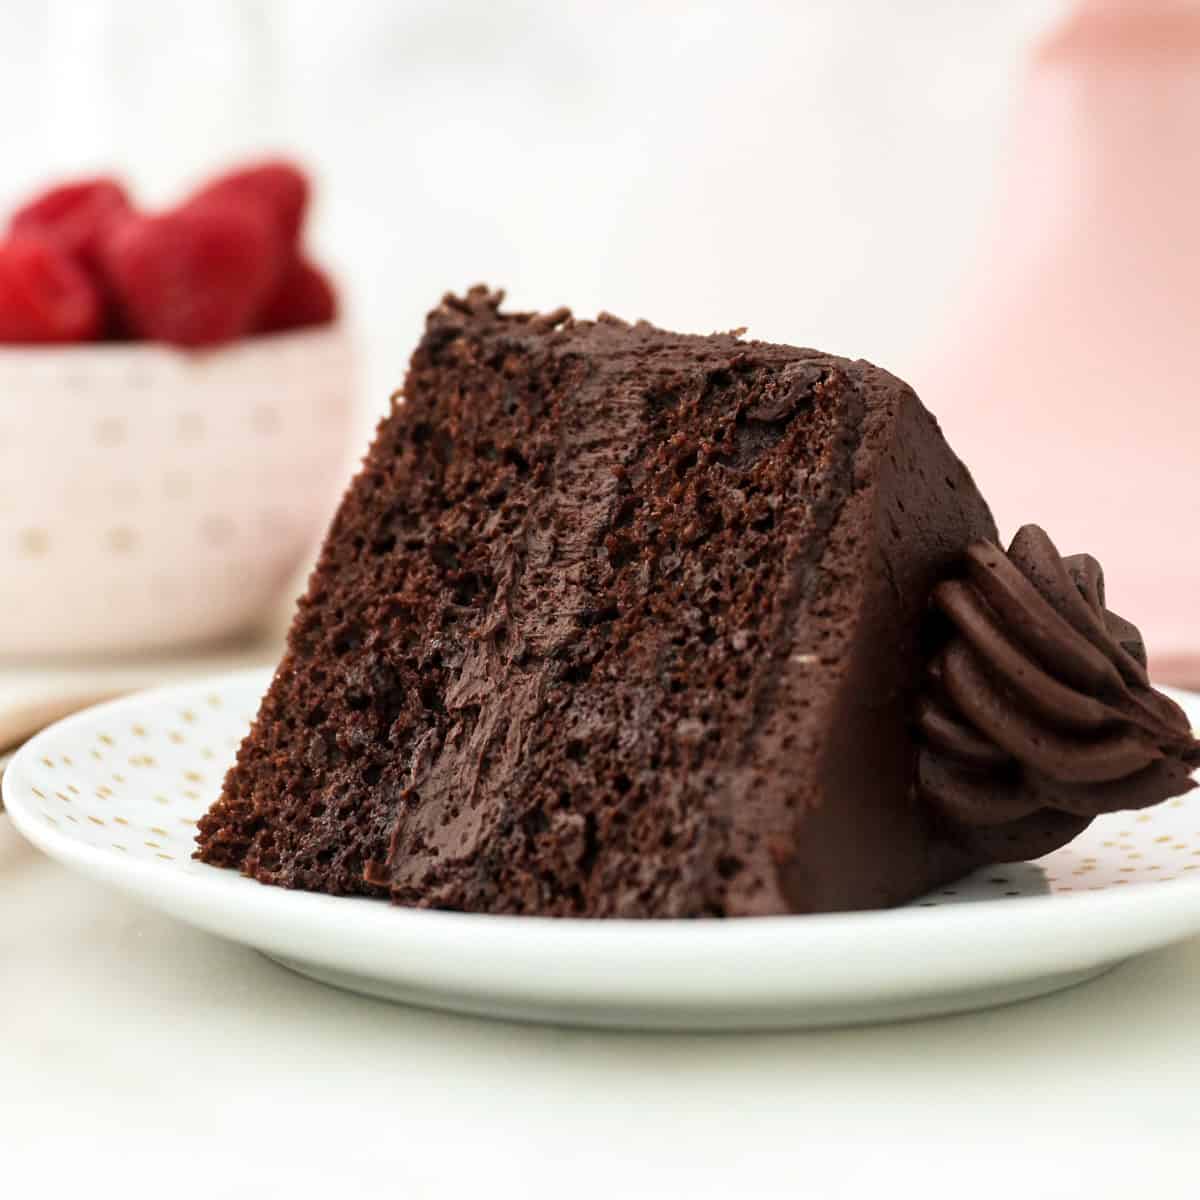 Small Chocolate Cake Recipe with Raspberry Coulis dessert for family